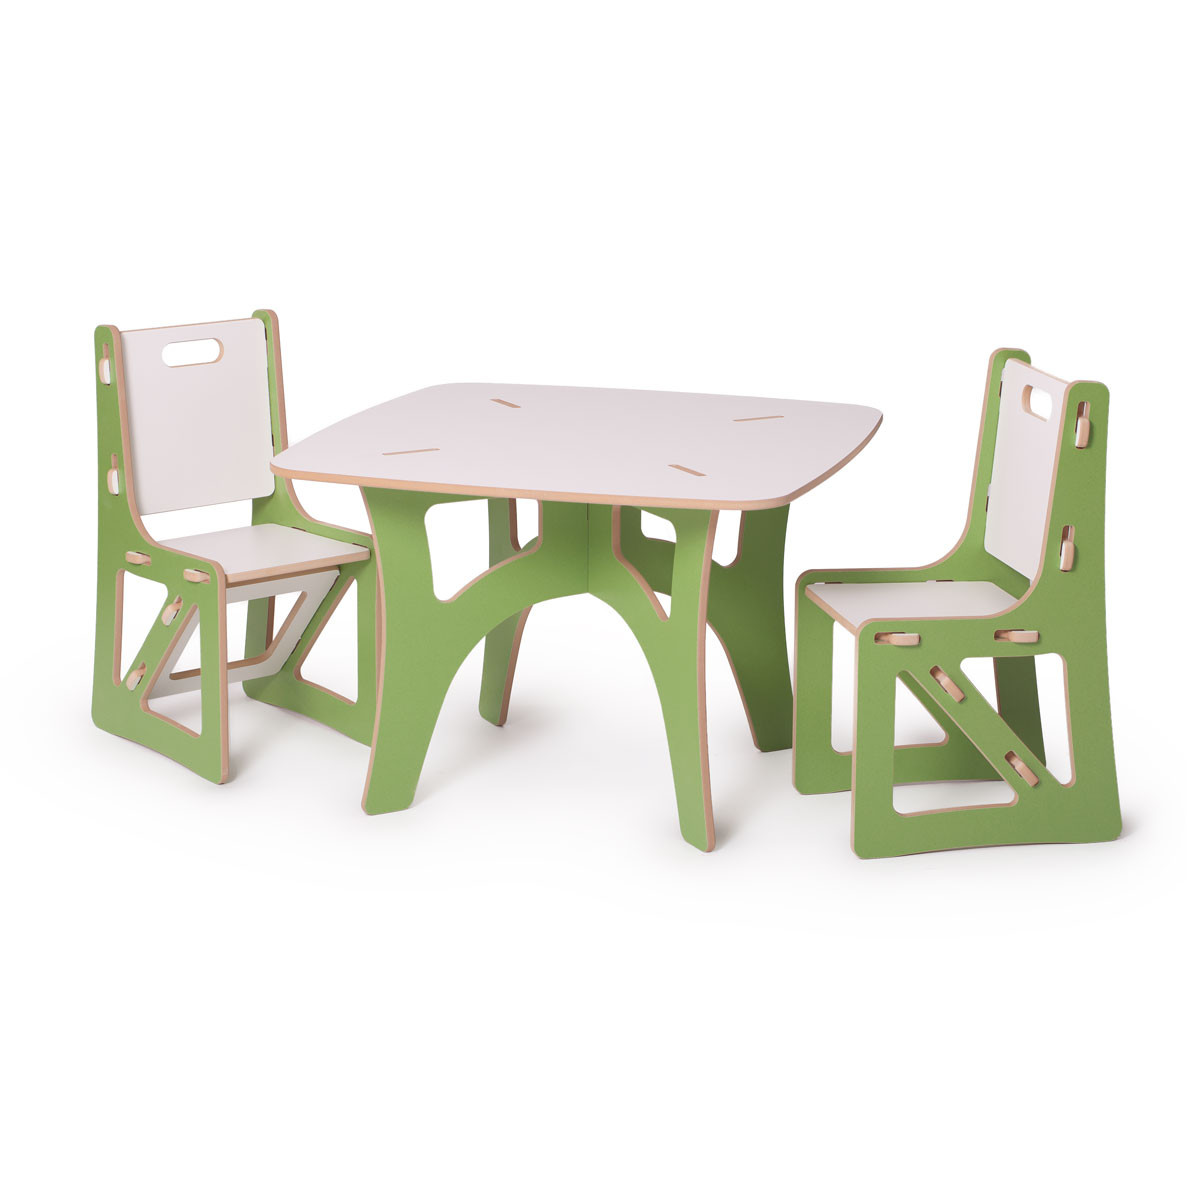 Modern Kids Table And Chair
 Modern Kid s Table and Chairs